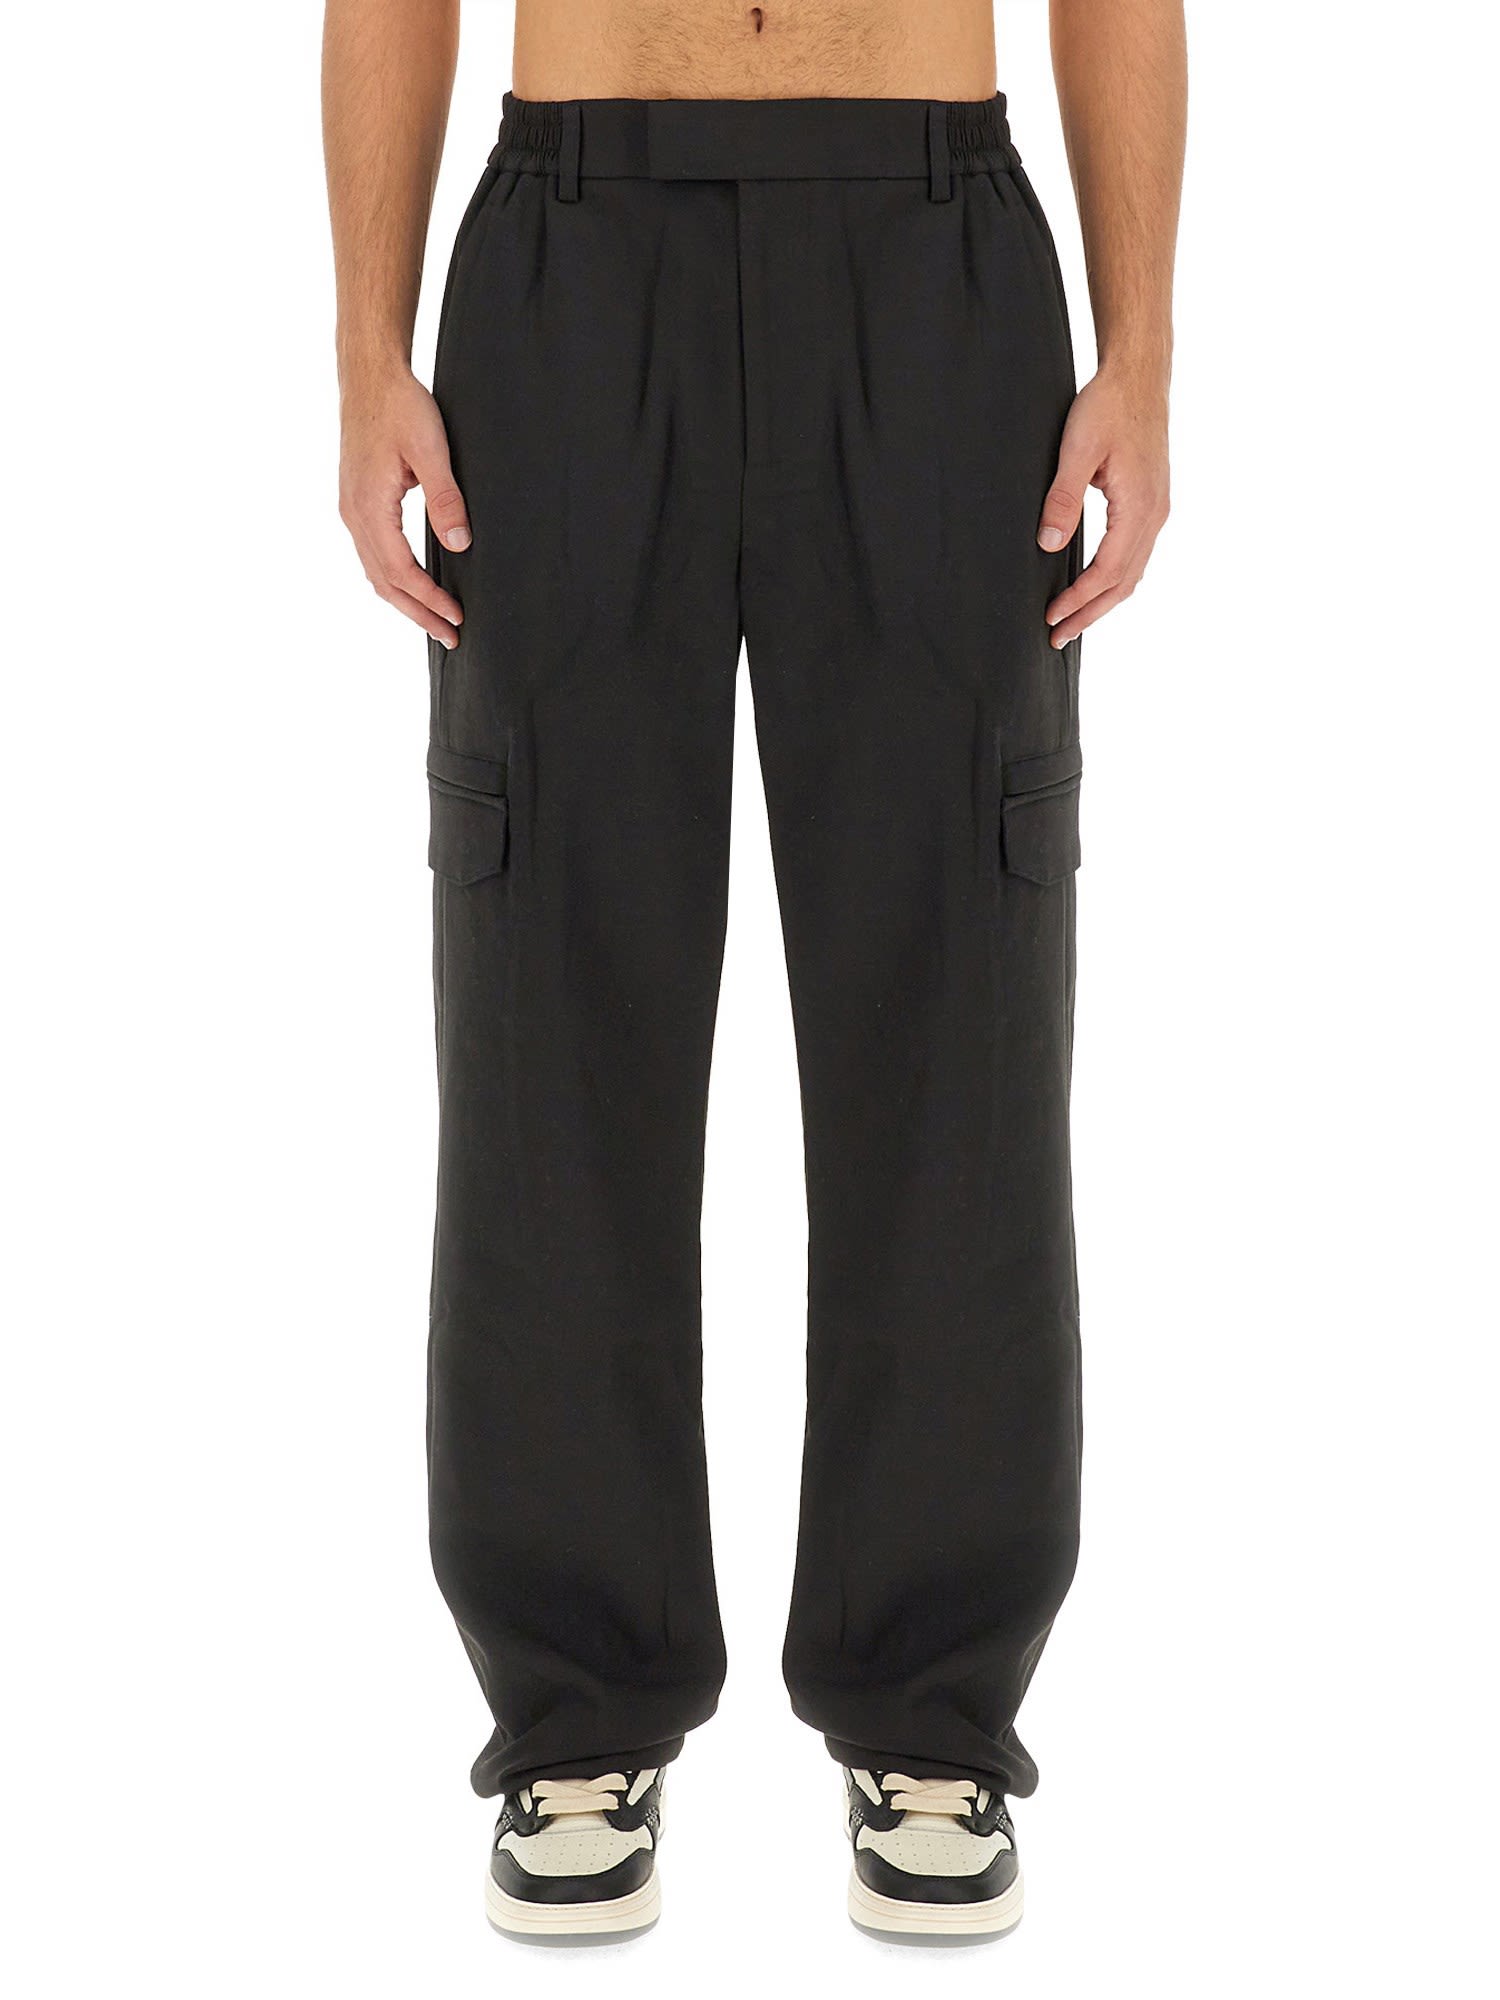 REPRESENT Relaxed Fit Pants